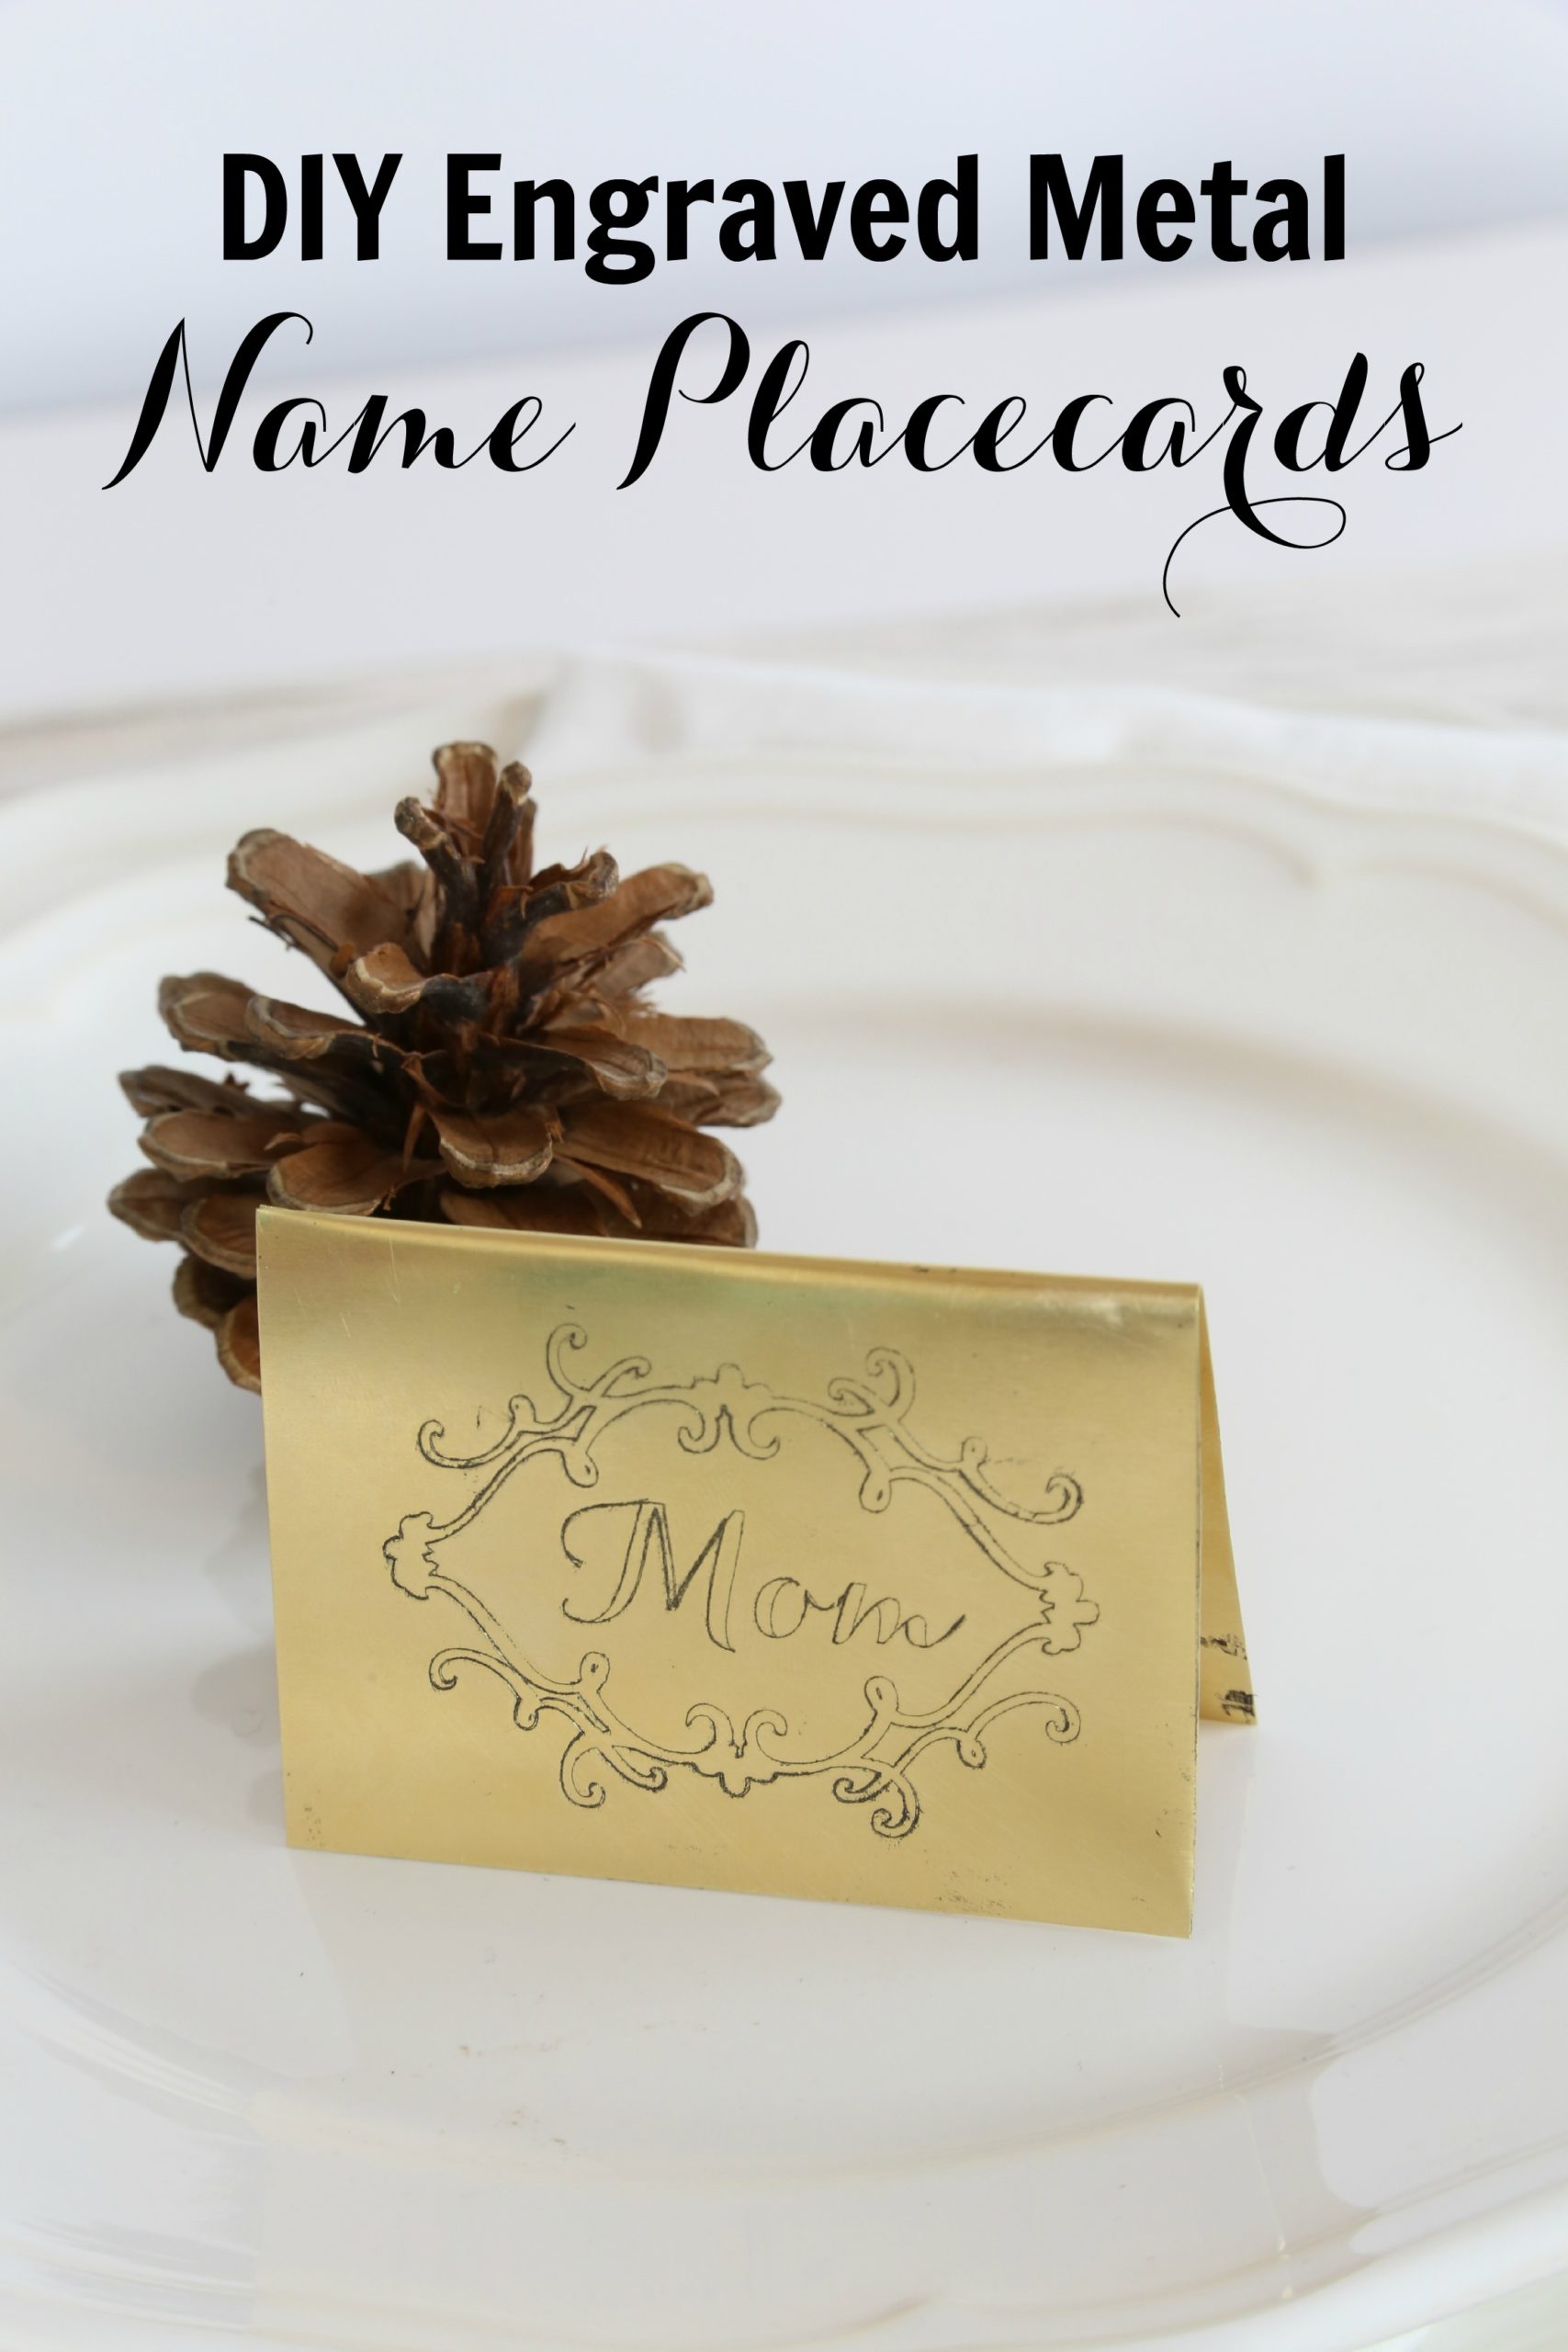 DIY Engraved Metal Placecards + Silhouette Black Friday DEALS!